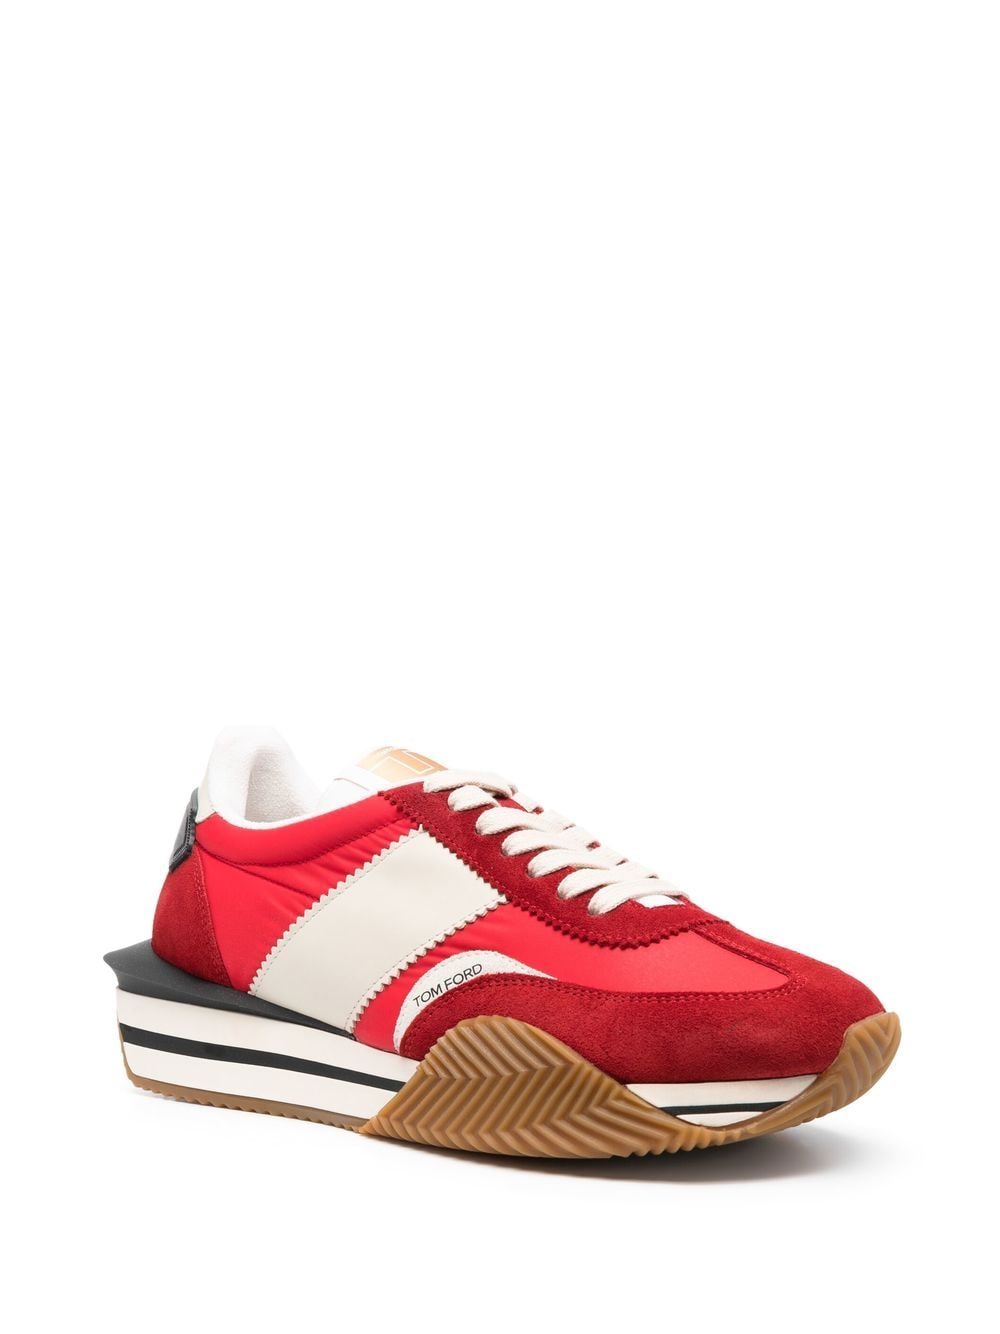 TOM FORD James low-top sneakers - RED IVORY